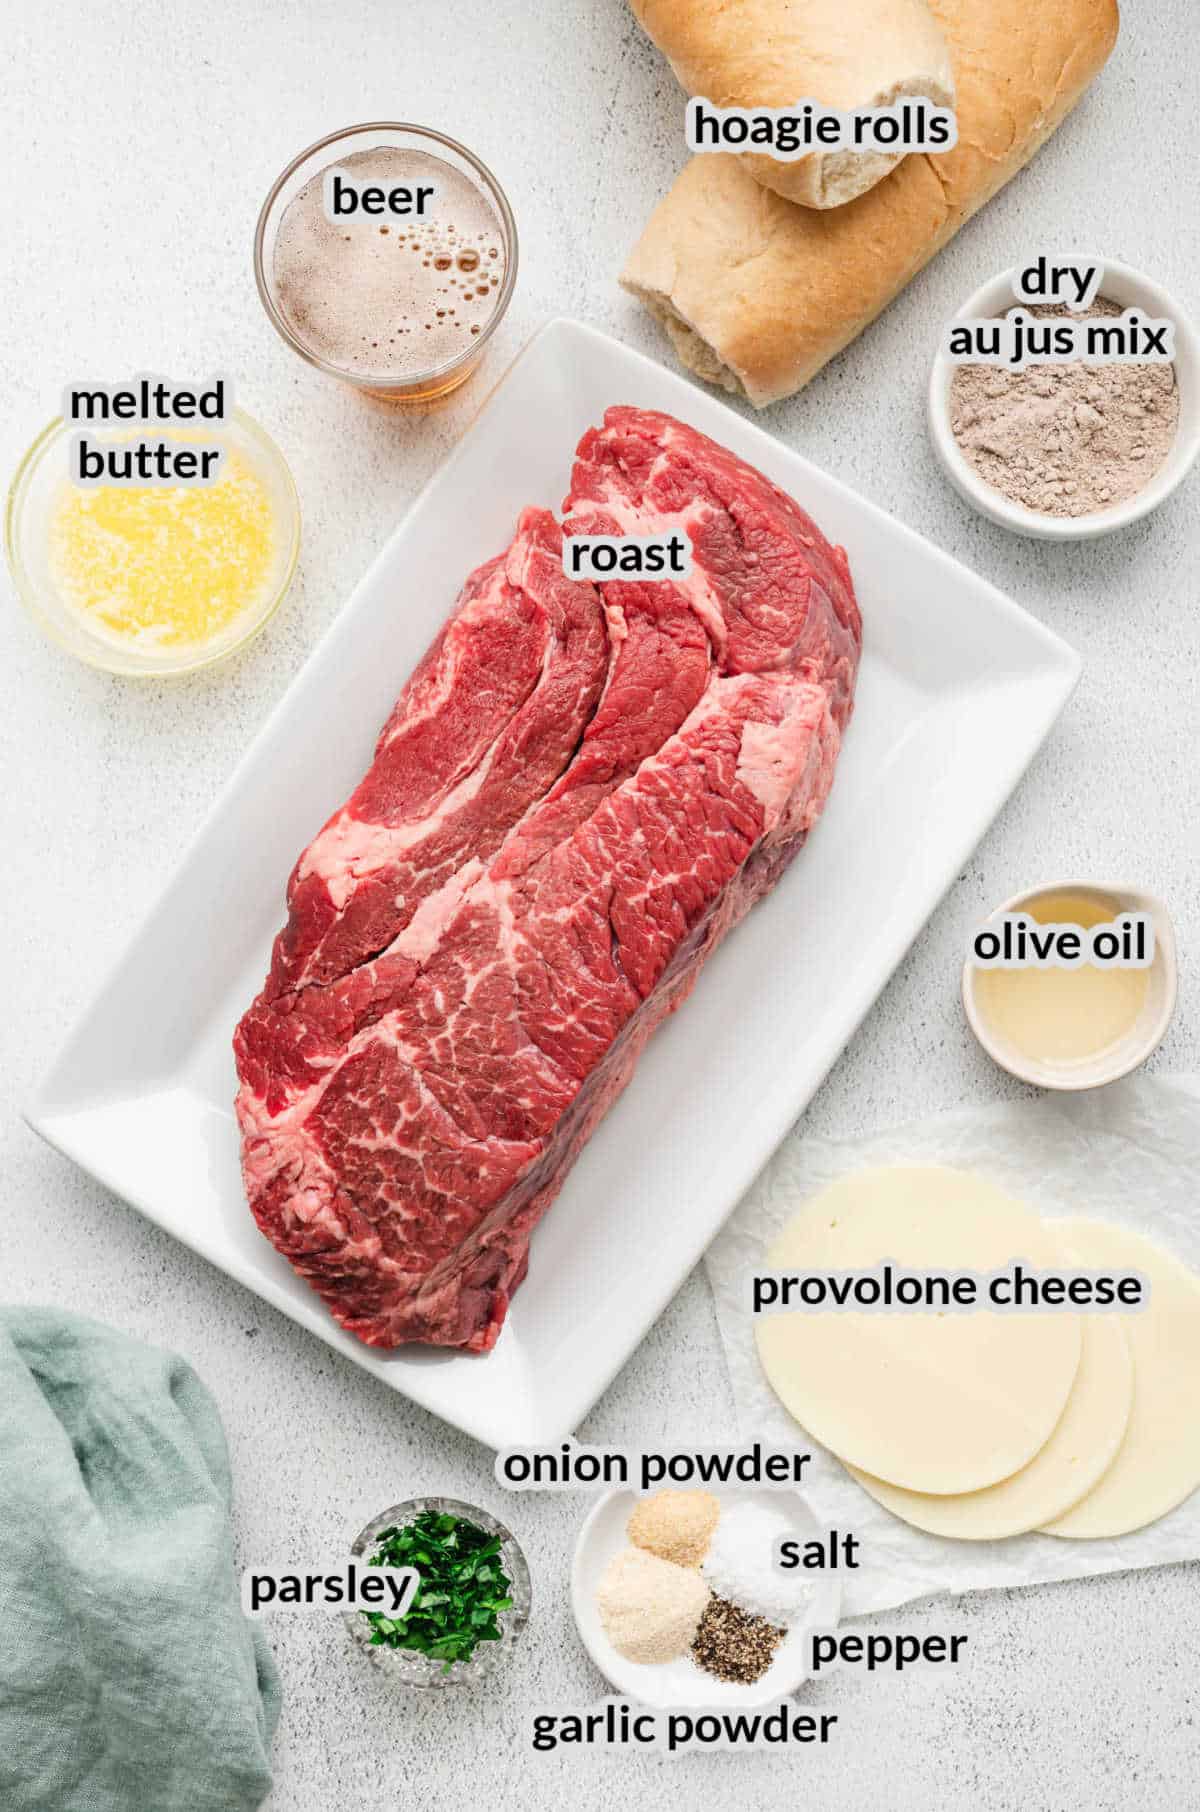 Overhead Image of French Dip Sandwiches Ingredients